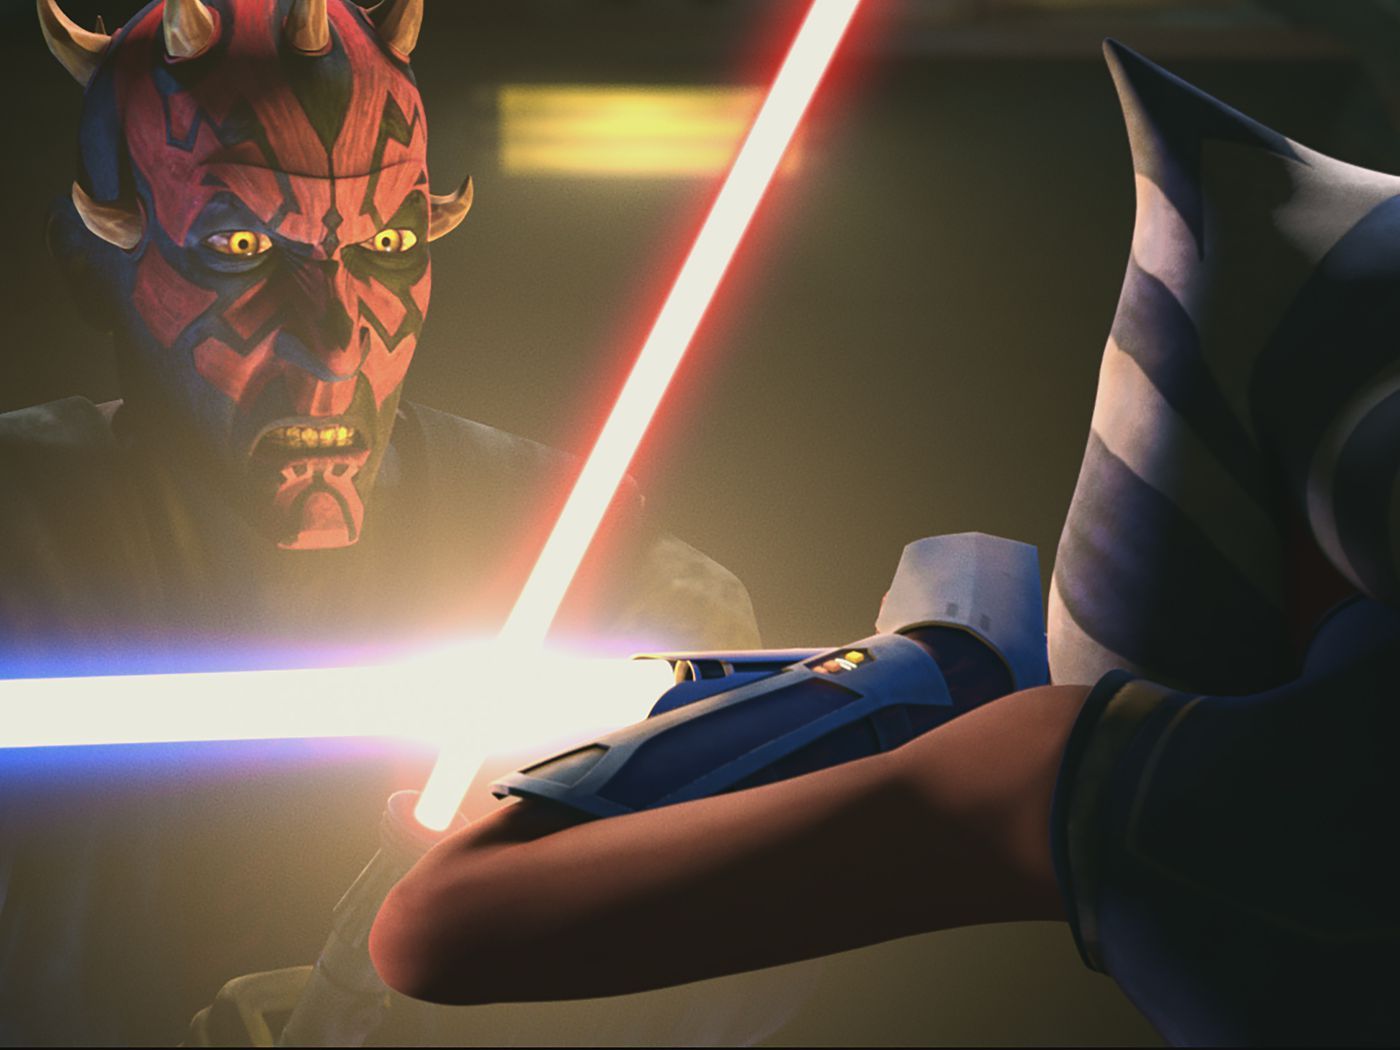 Darth Maul survived The Phantom Menace and thrived on The Clone Wars